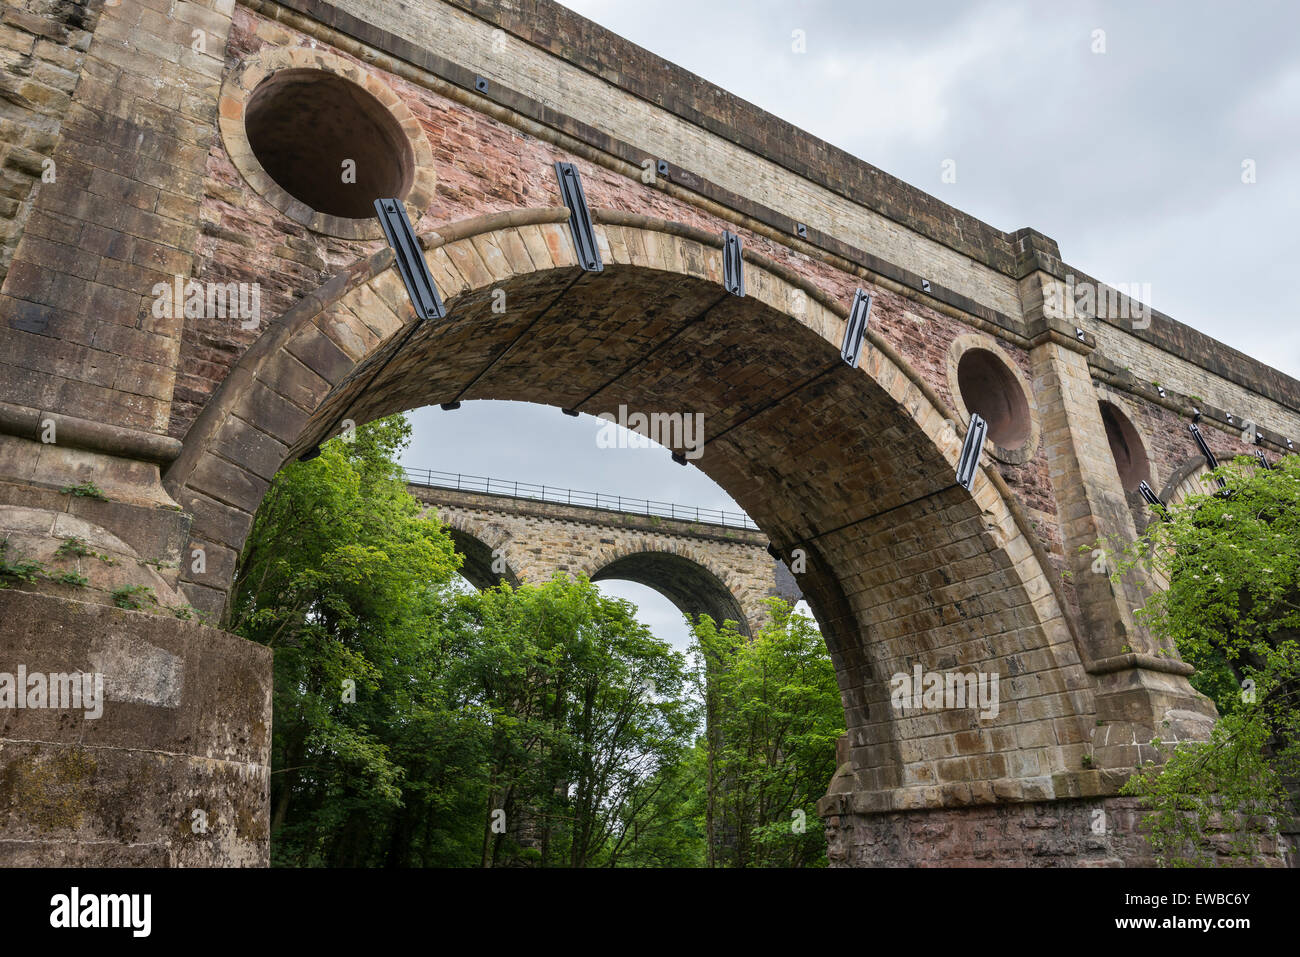 The newly restored stone arches of Marple aquaduct in Greater Manchester. A feature of the Peak Forest canal. Stock Photo